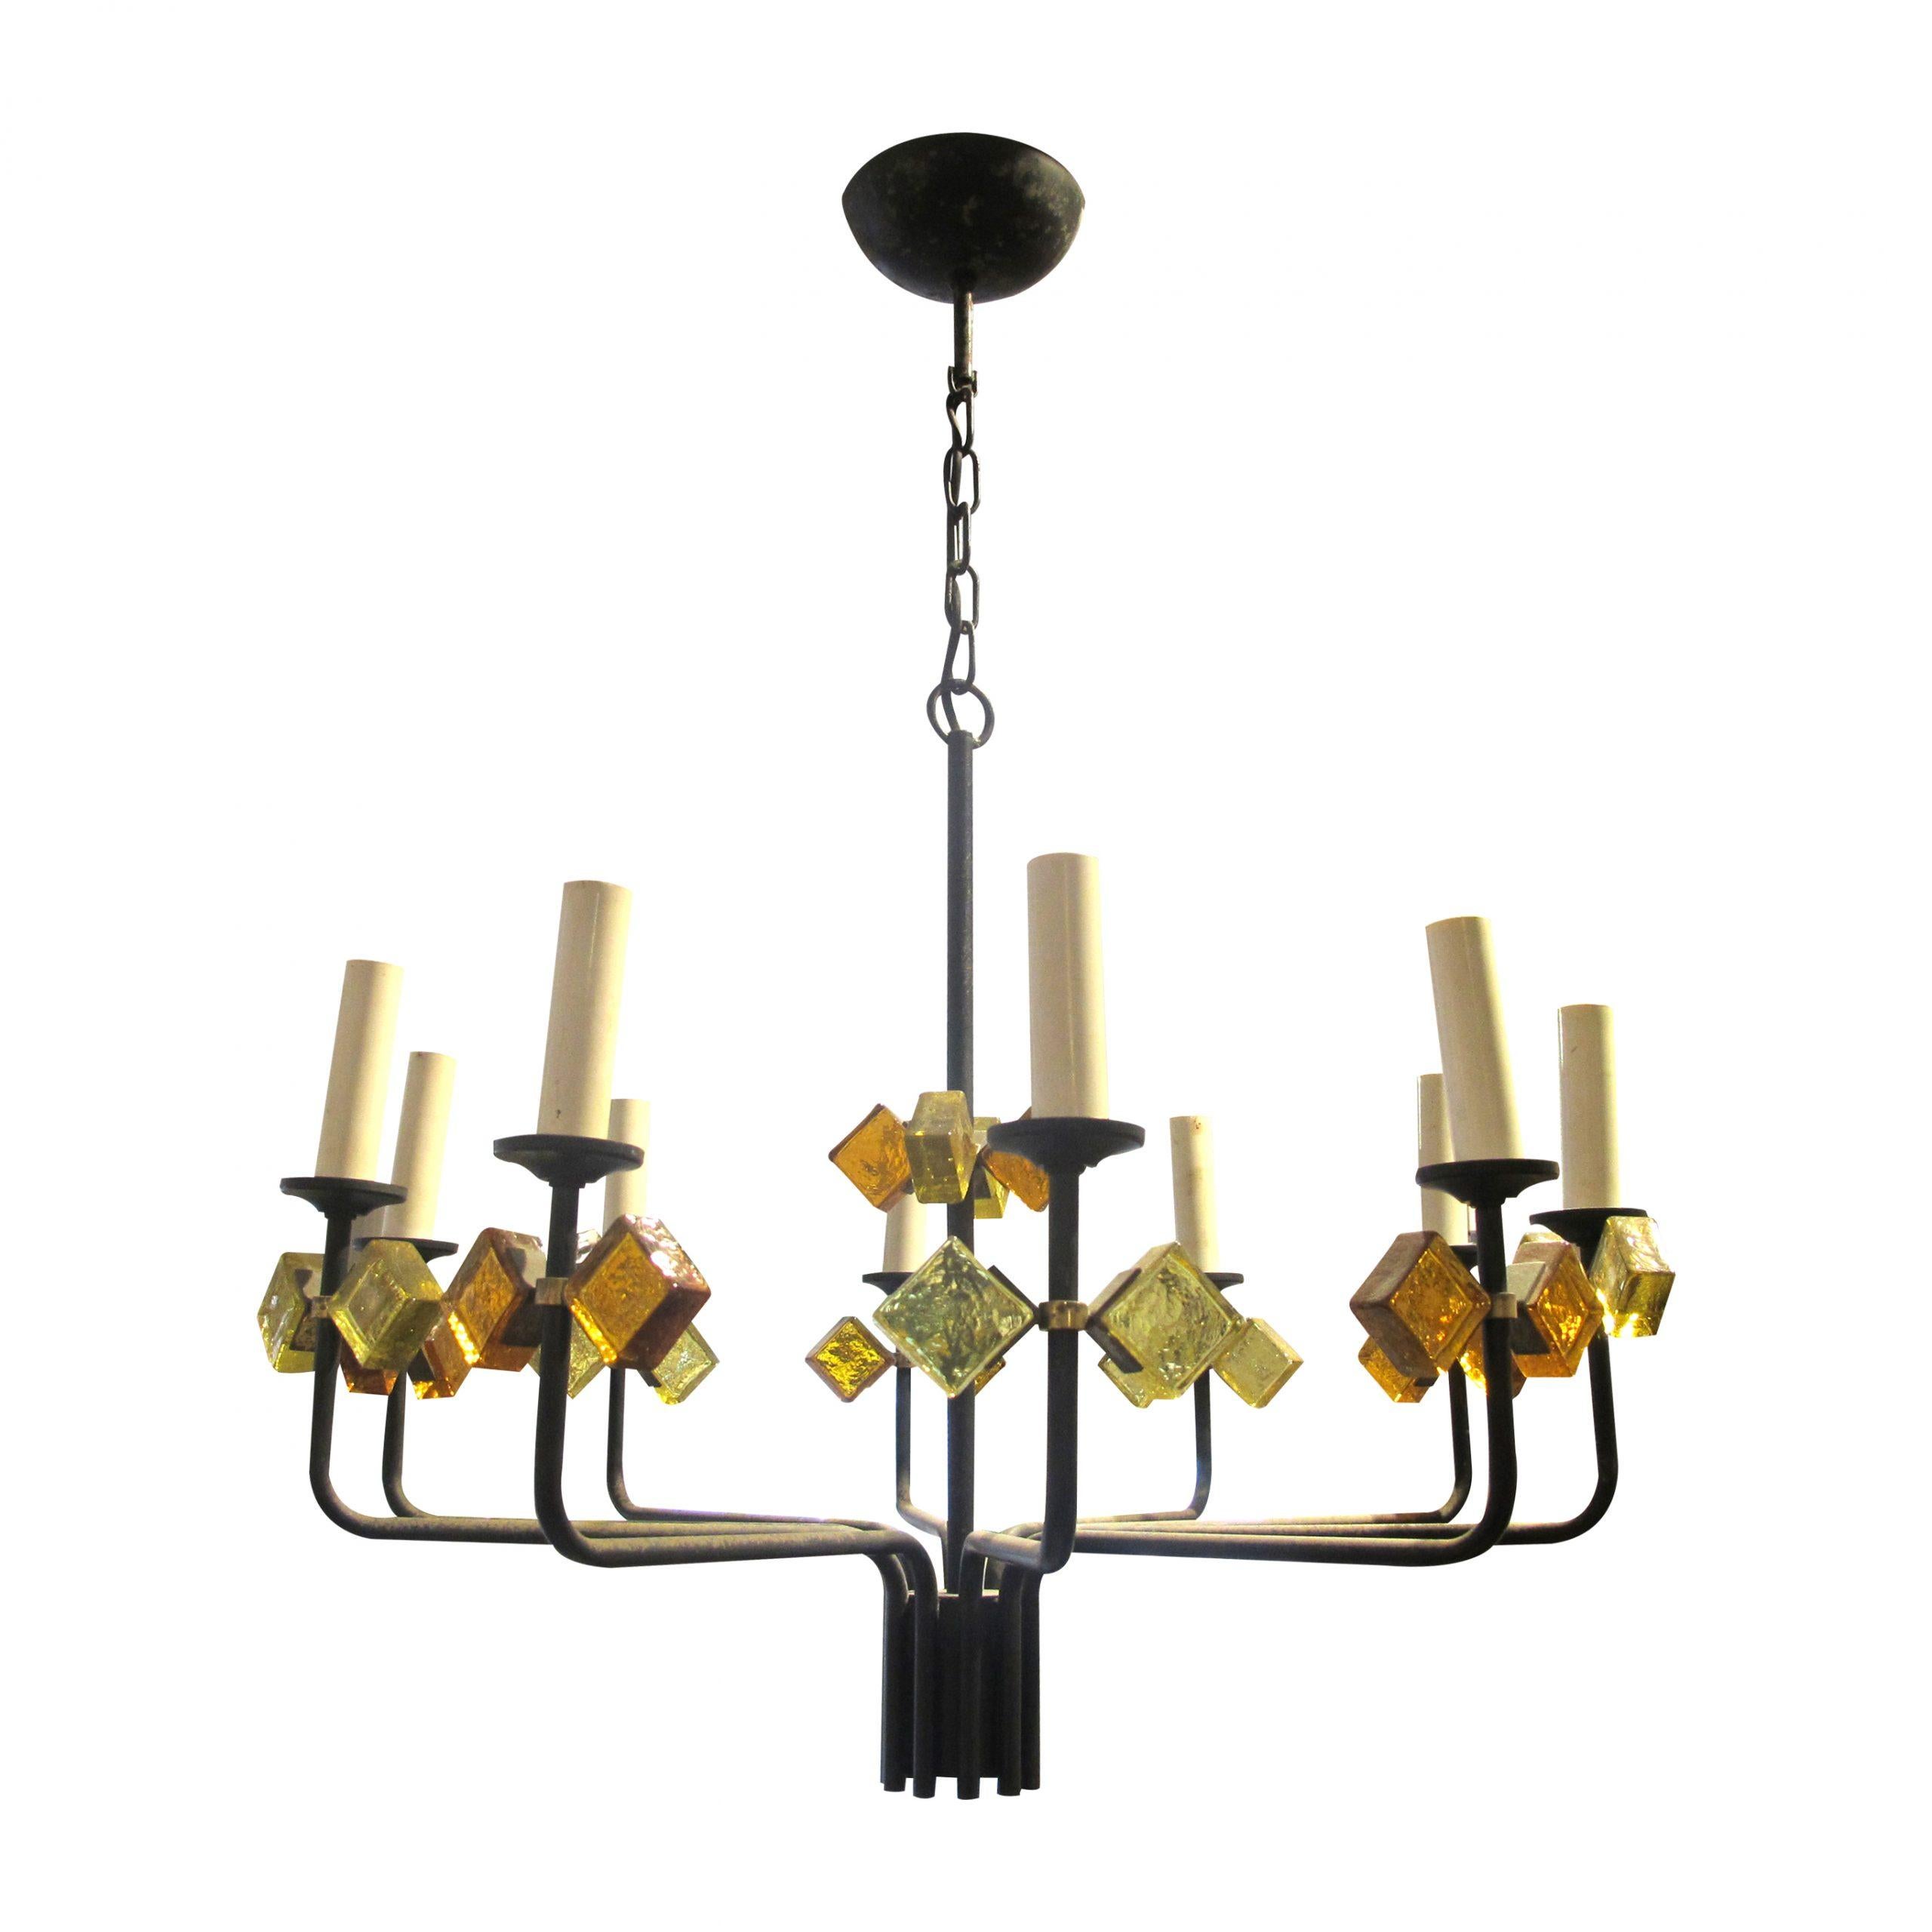 Mid-Century Modern 1950s Danish Pair of Iron and Coloured Glass Chandelier By Svend Aage Holm Soren en vente